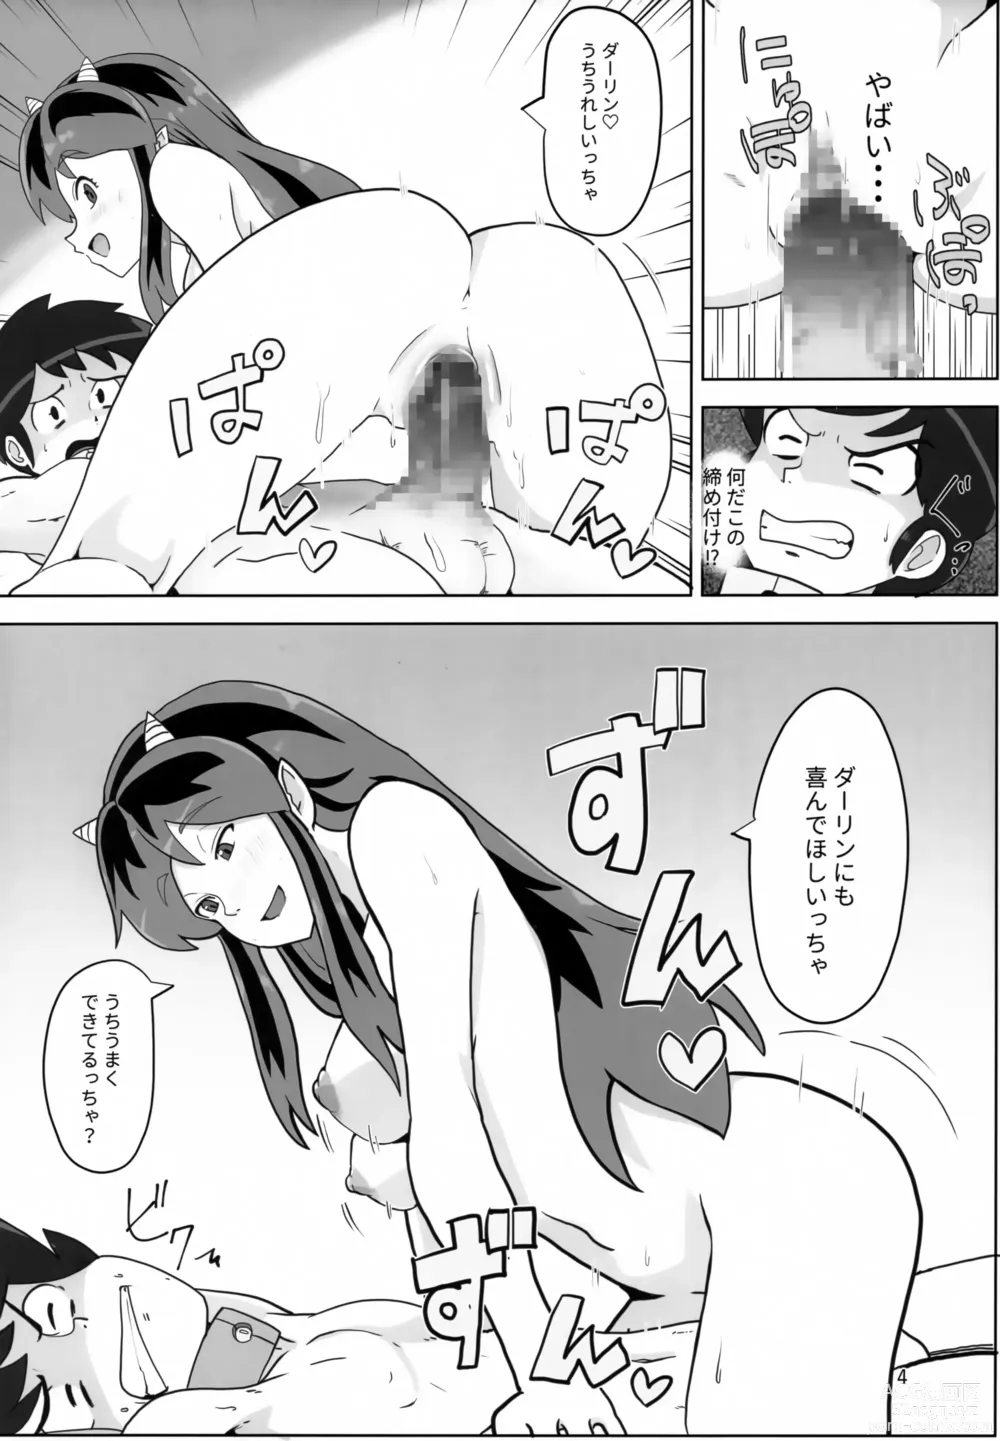 Page 5 of doujinshi Dont fidget too much